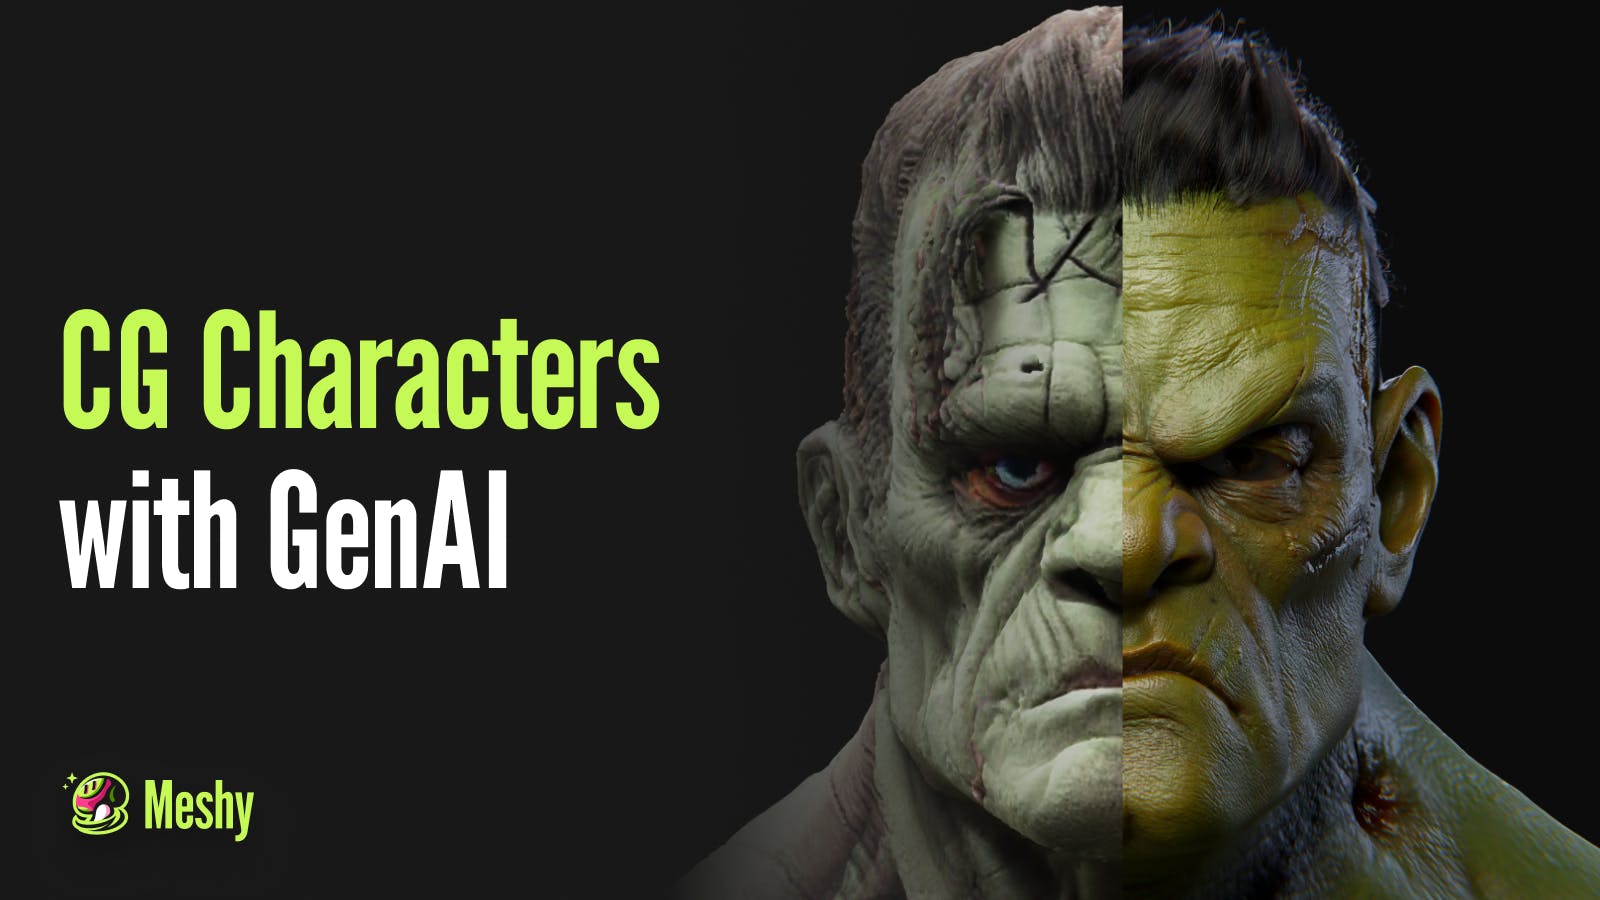 Creating Lifelike 3D Characters with AI-Powered Tools: A Comprehensive Guide